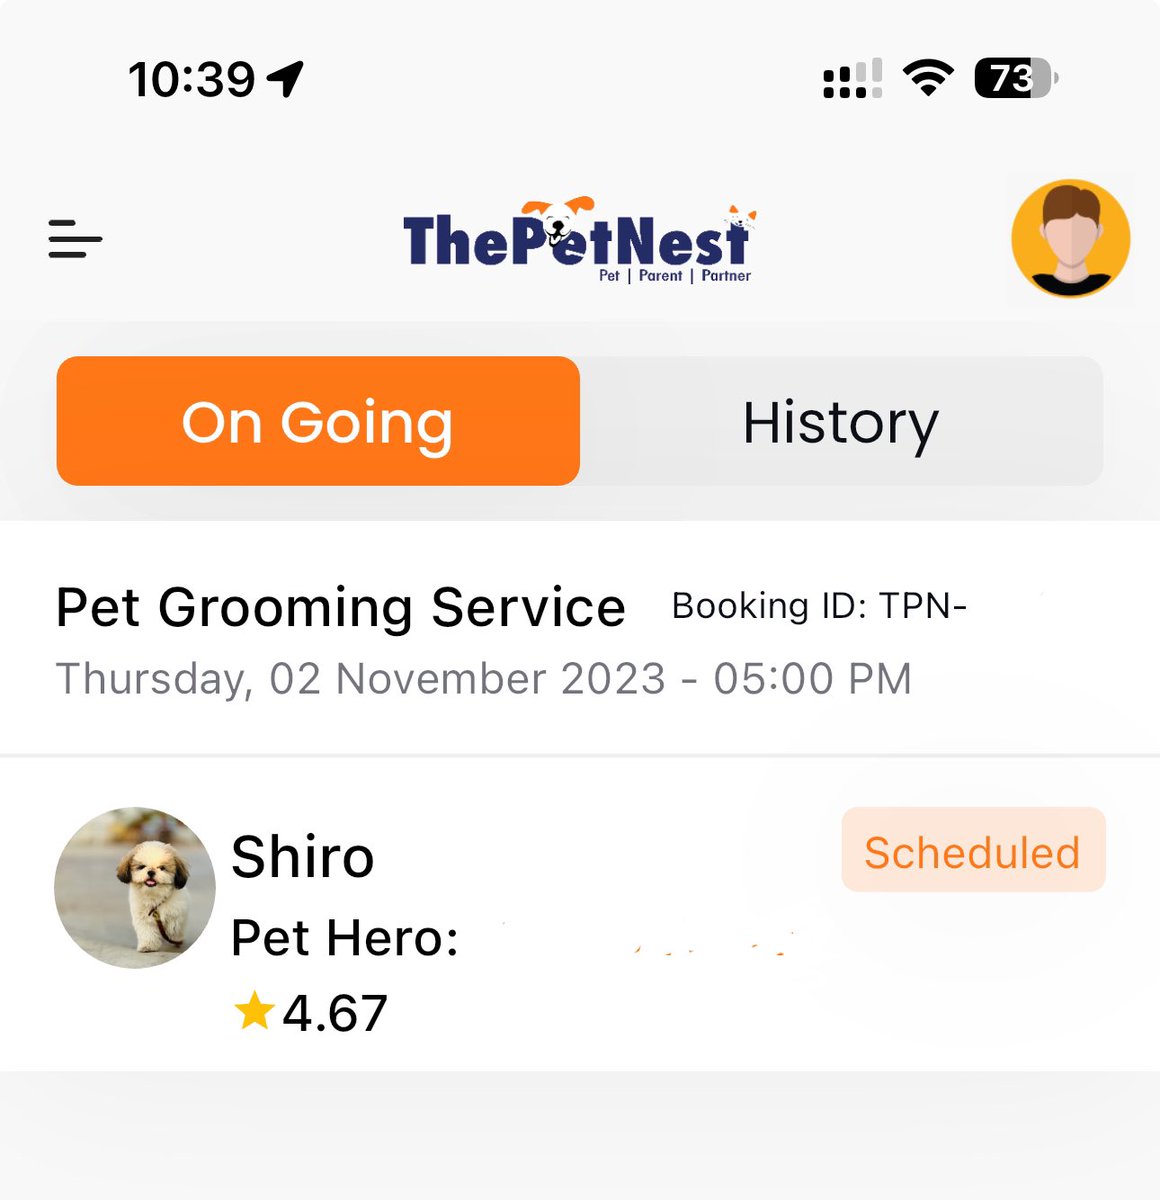 Ok so after lot of search I just scheduled an appointment with @ThePetNest_ for my Shiro. Let's see how the service will be, I'll share my experience.